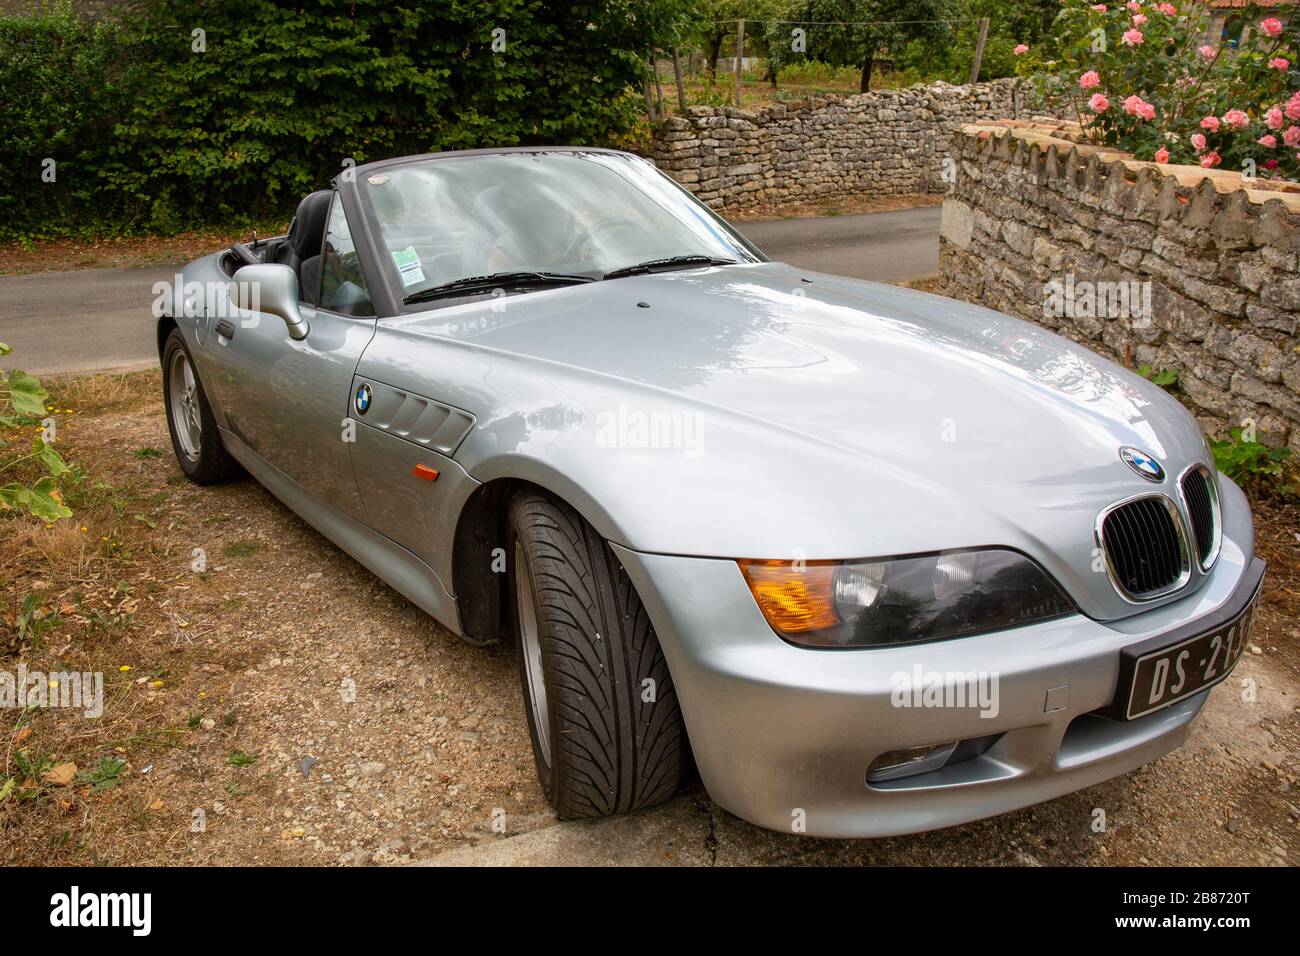 Bordeaux , Aquitaine / France - 11 19 2019 : Silver gray BMW Z3 sport car with convertible roof Stock Photo